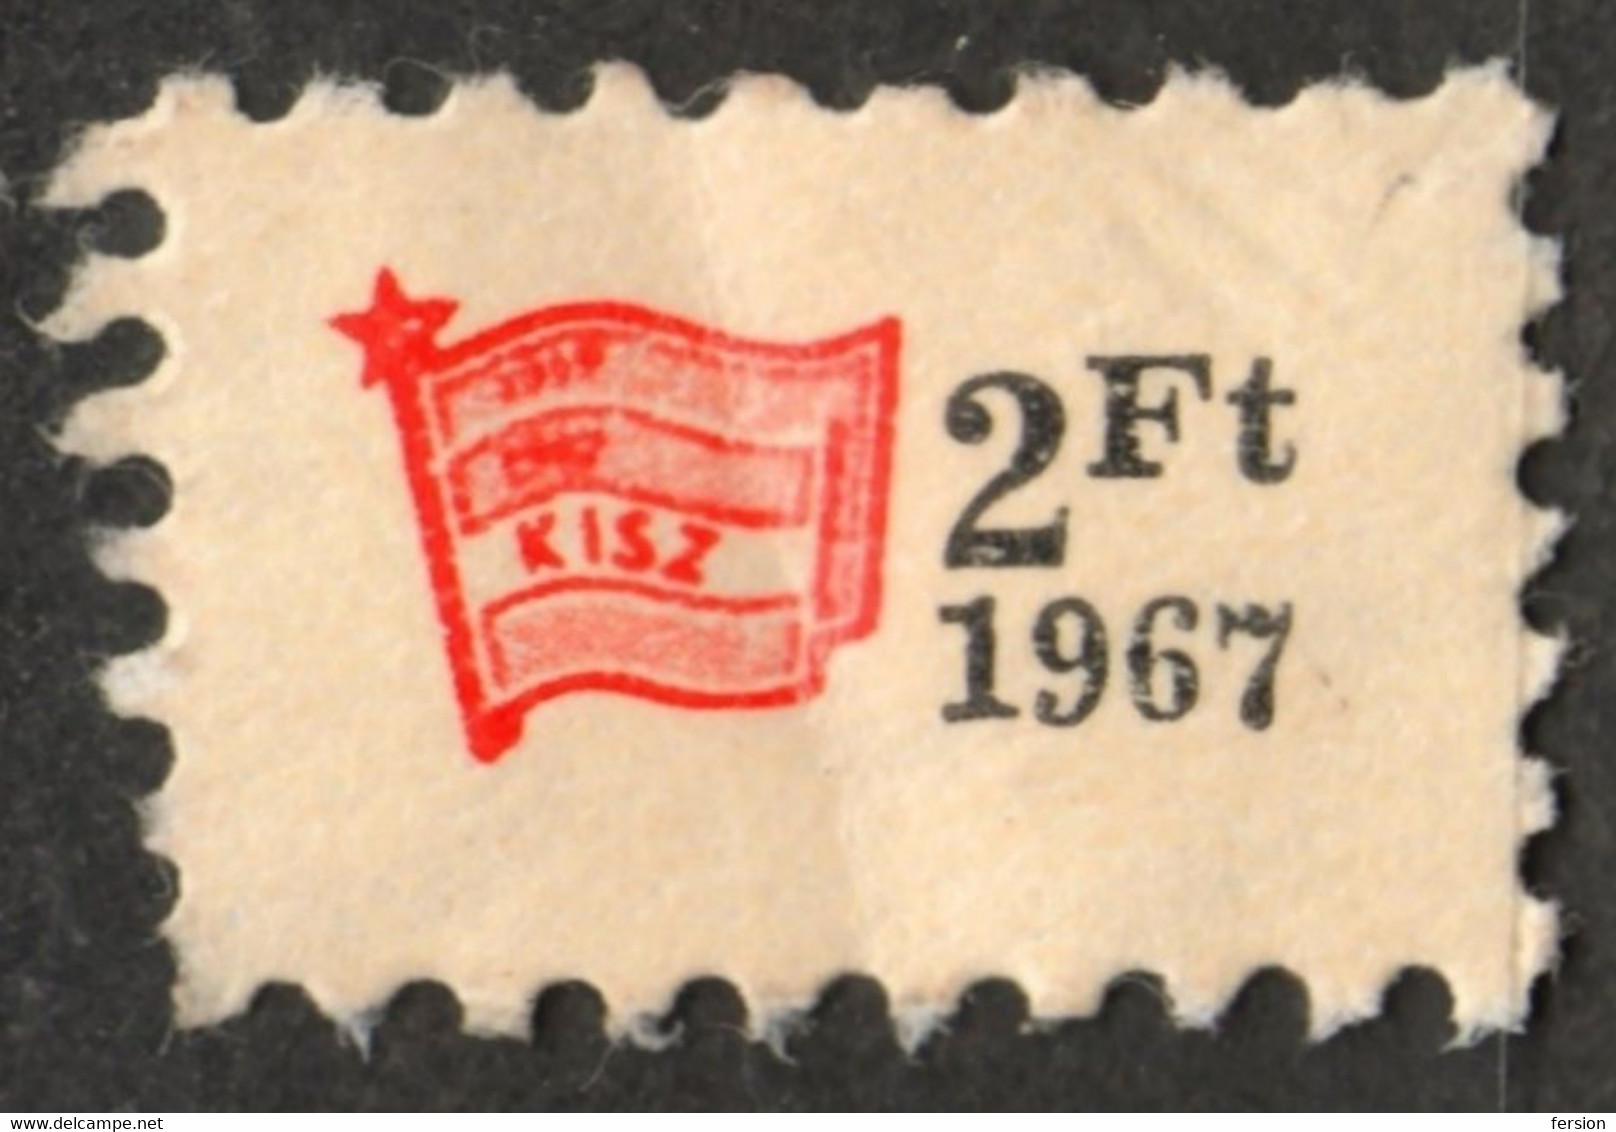 KISZ Hungarian Young Communist League FLAG Red Star - Member Charity LABEL CINDERELLA VIGNETTE - Hungary 1967 - Servizio